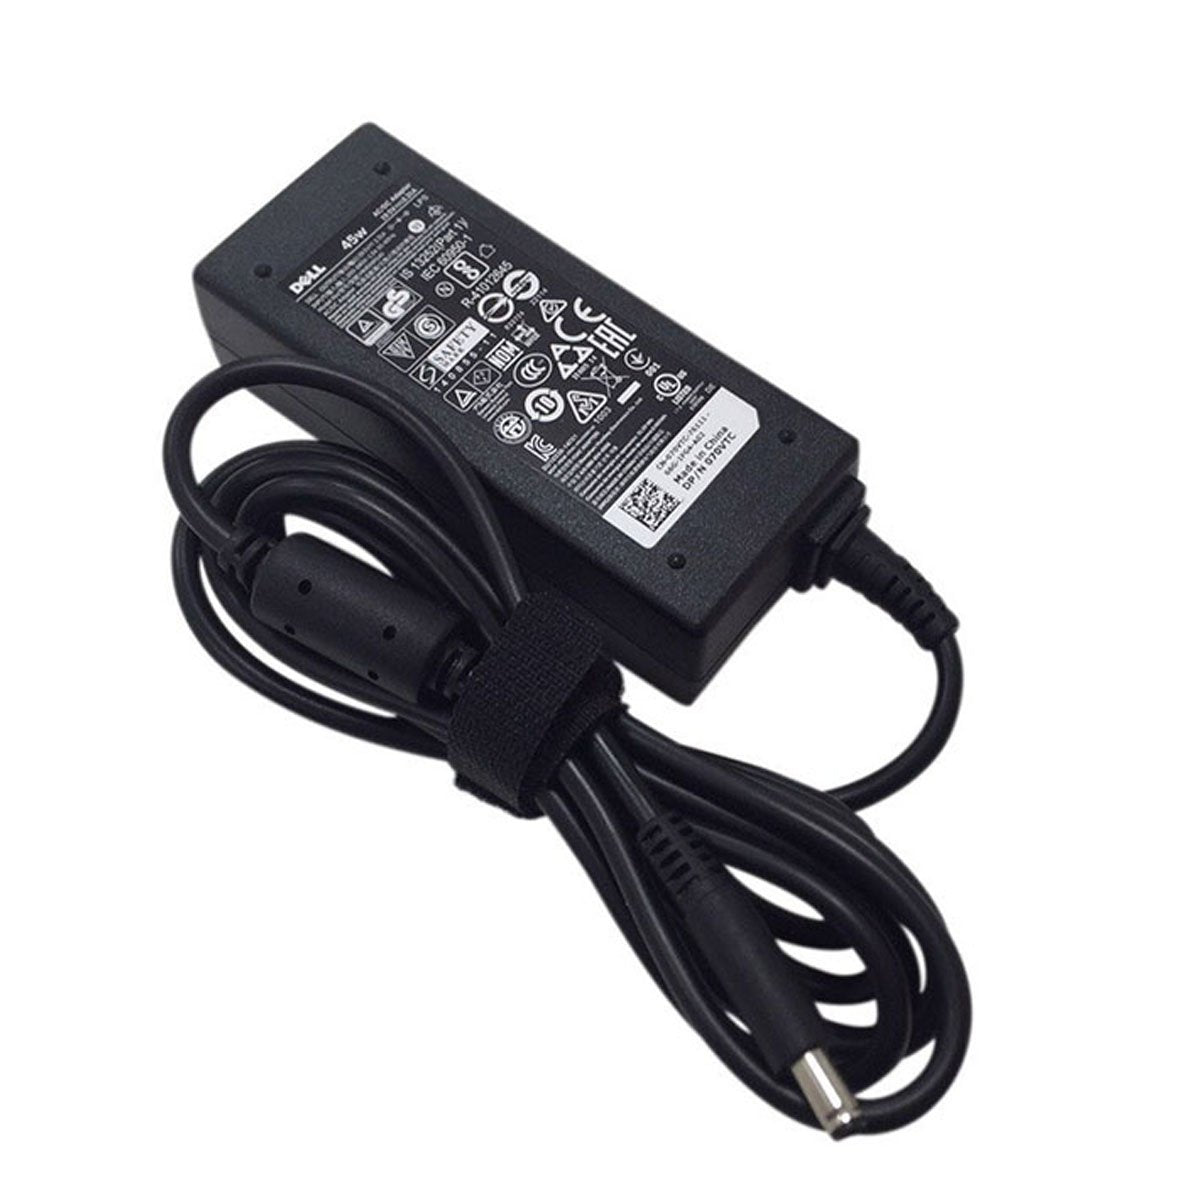 Dell Inspiron 13 5370 Original 45W Laptop Charger Adapter With Power Cord 19.5V 4.5mm Pin